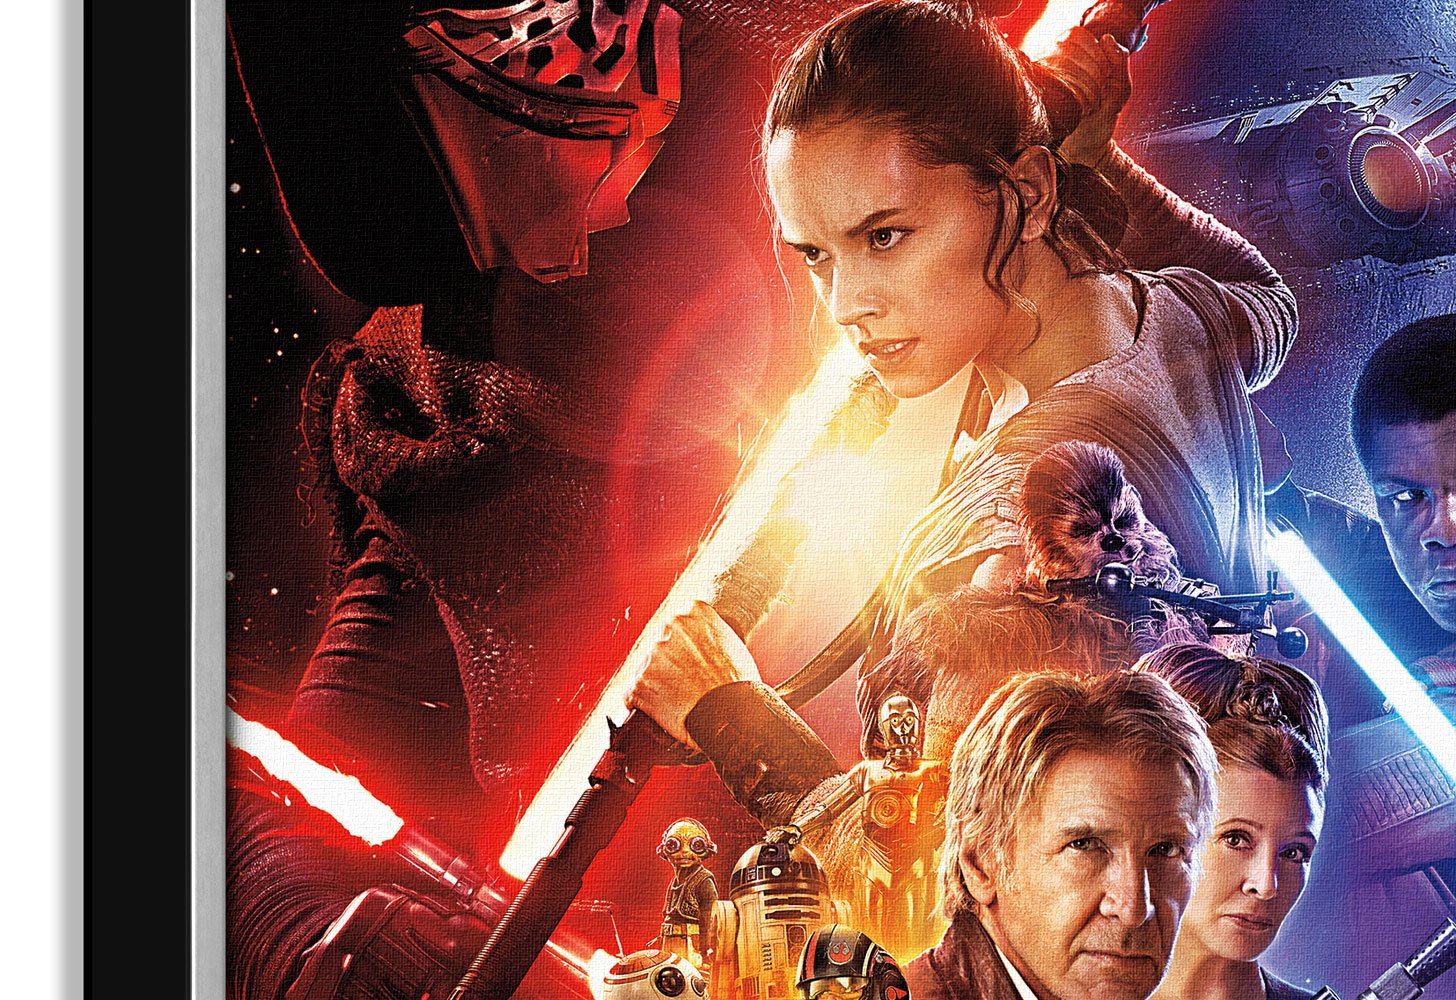 Star Wars Ep. VII: The Force Awakens for ios instal